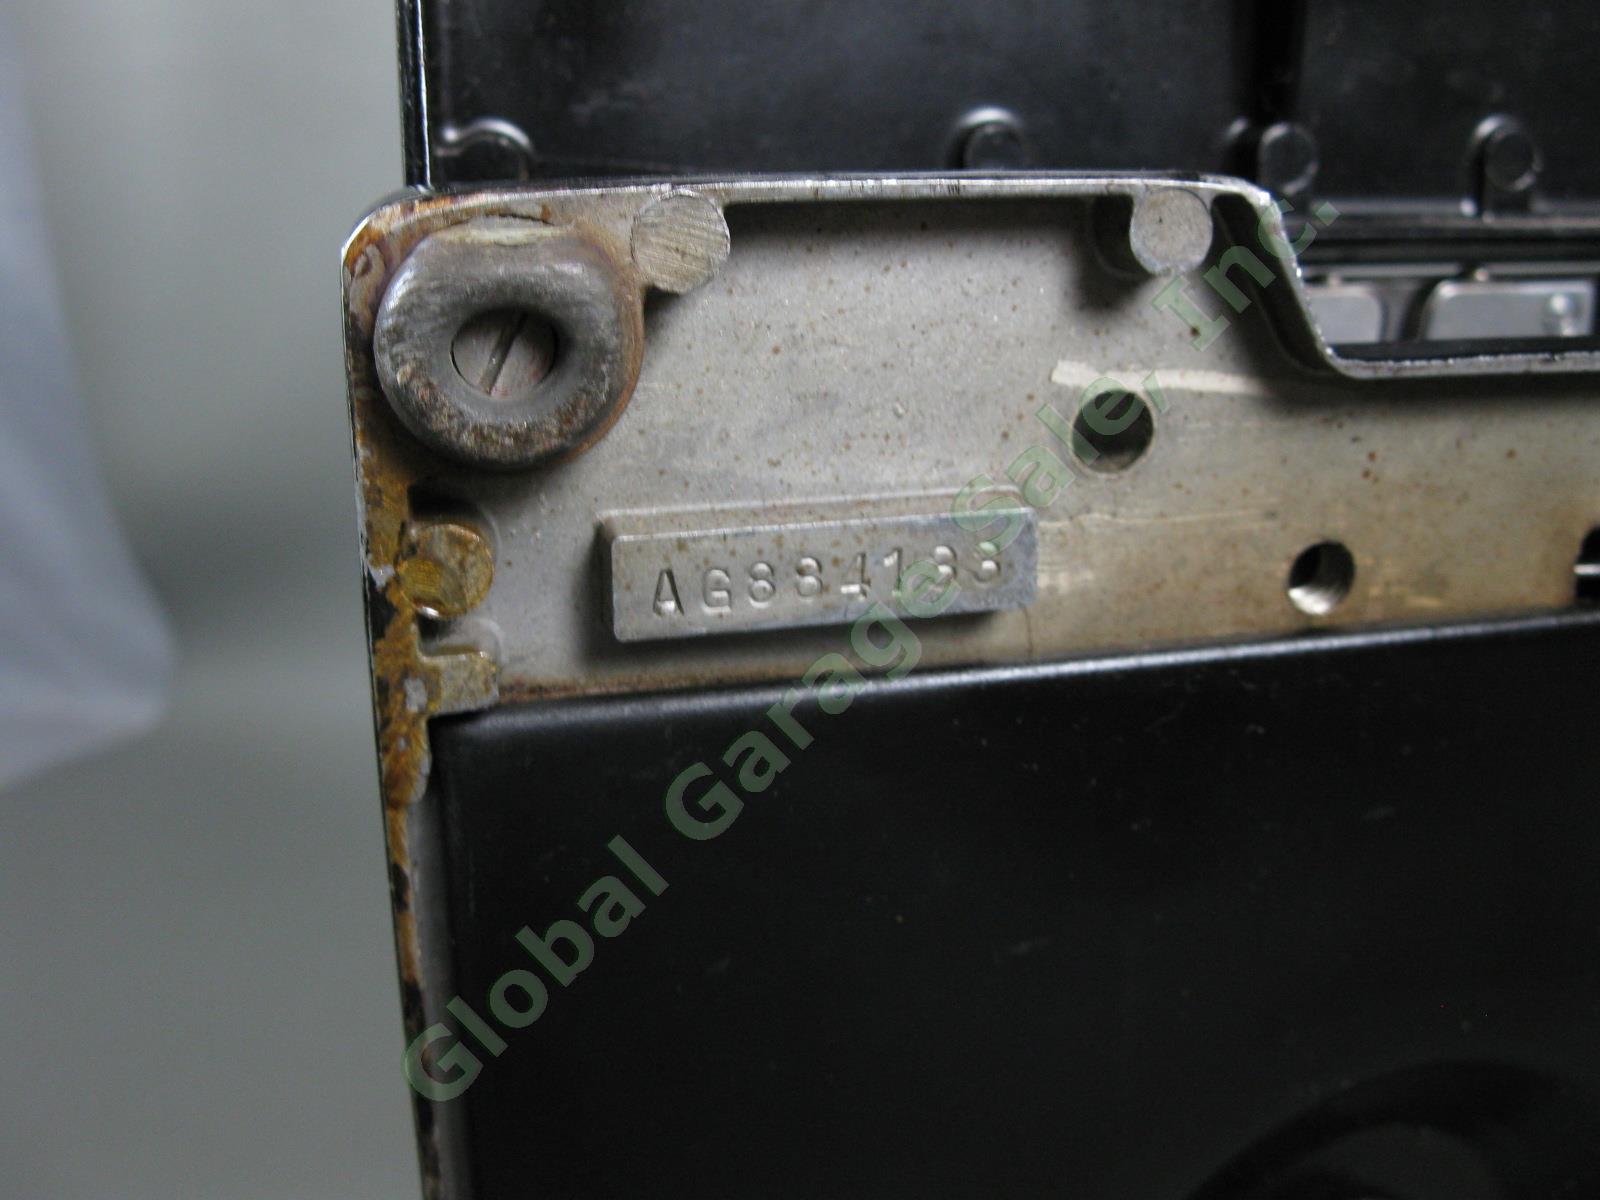 Vintage 1946 Singer Featherweight 221 Sewing Machine Case Model AG884133 Tested 4